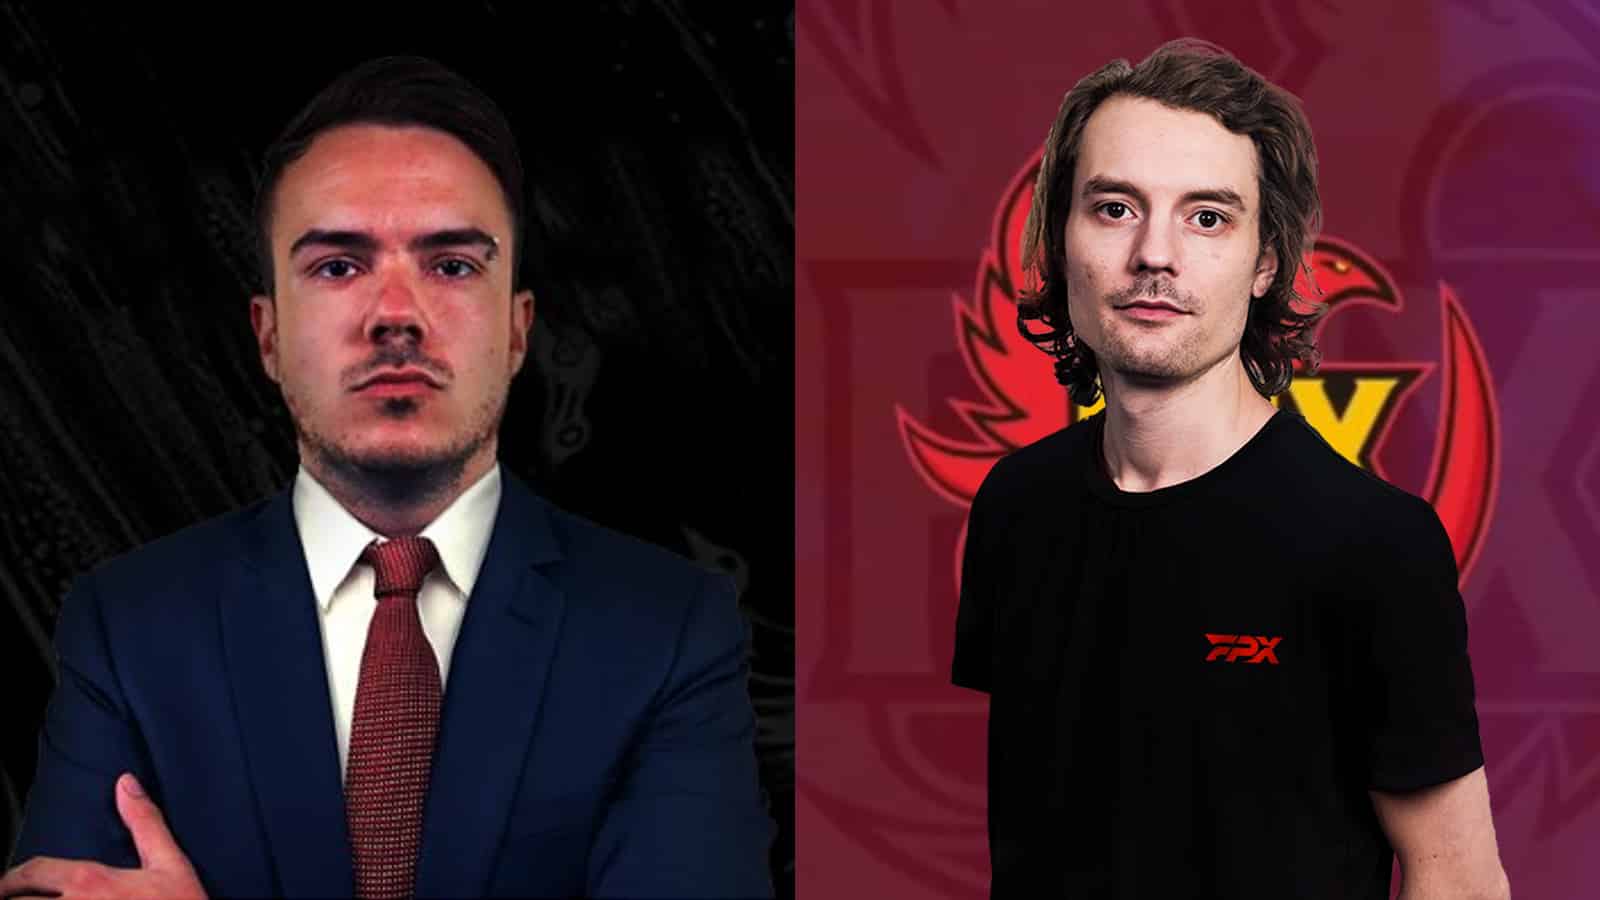 FPX signs “peca” as the new manager for its CS: GO and Valorant rosters